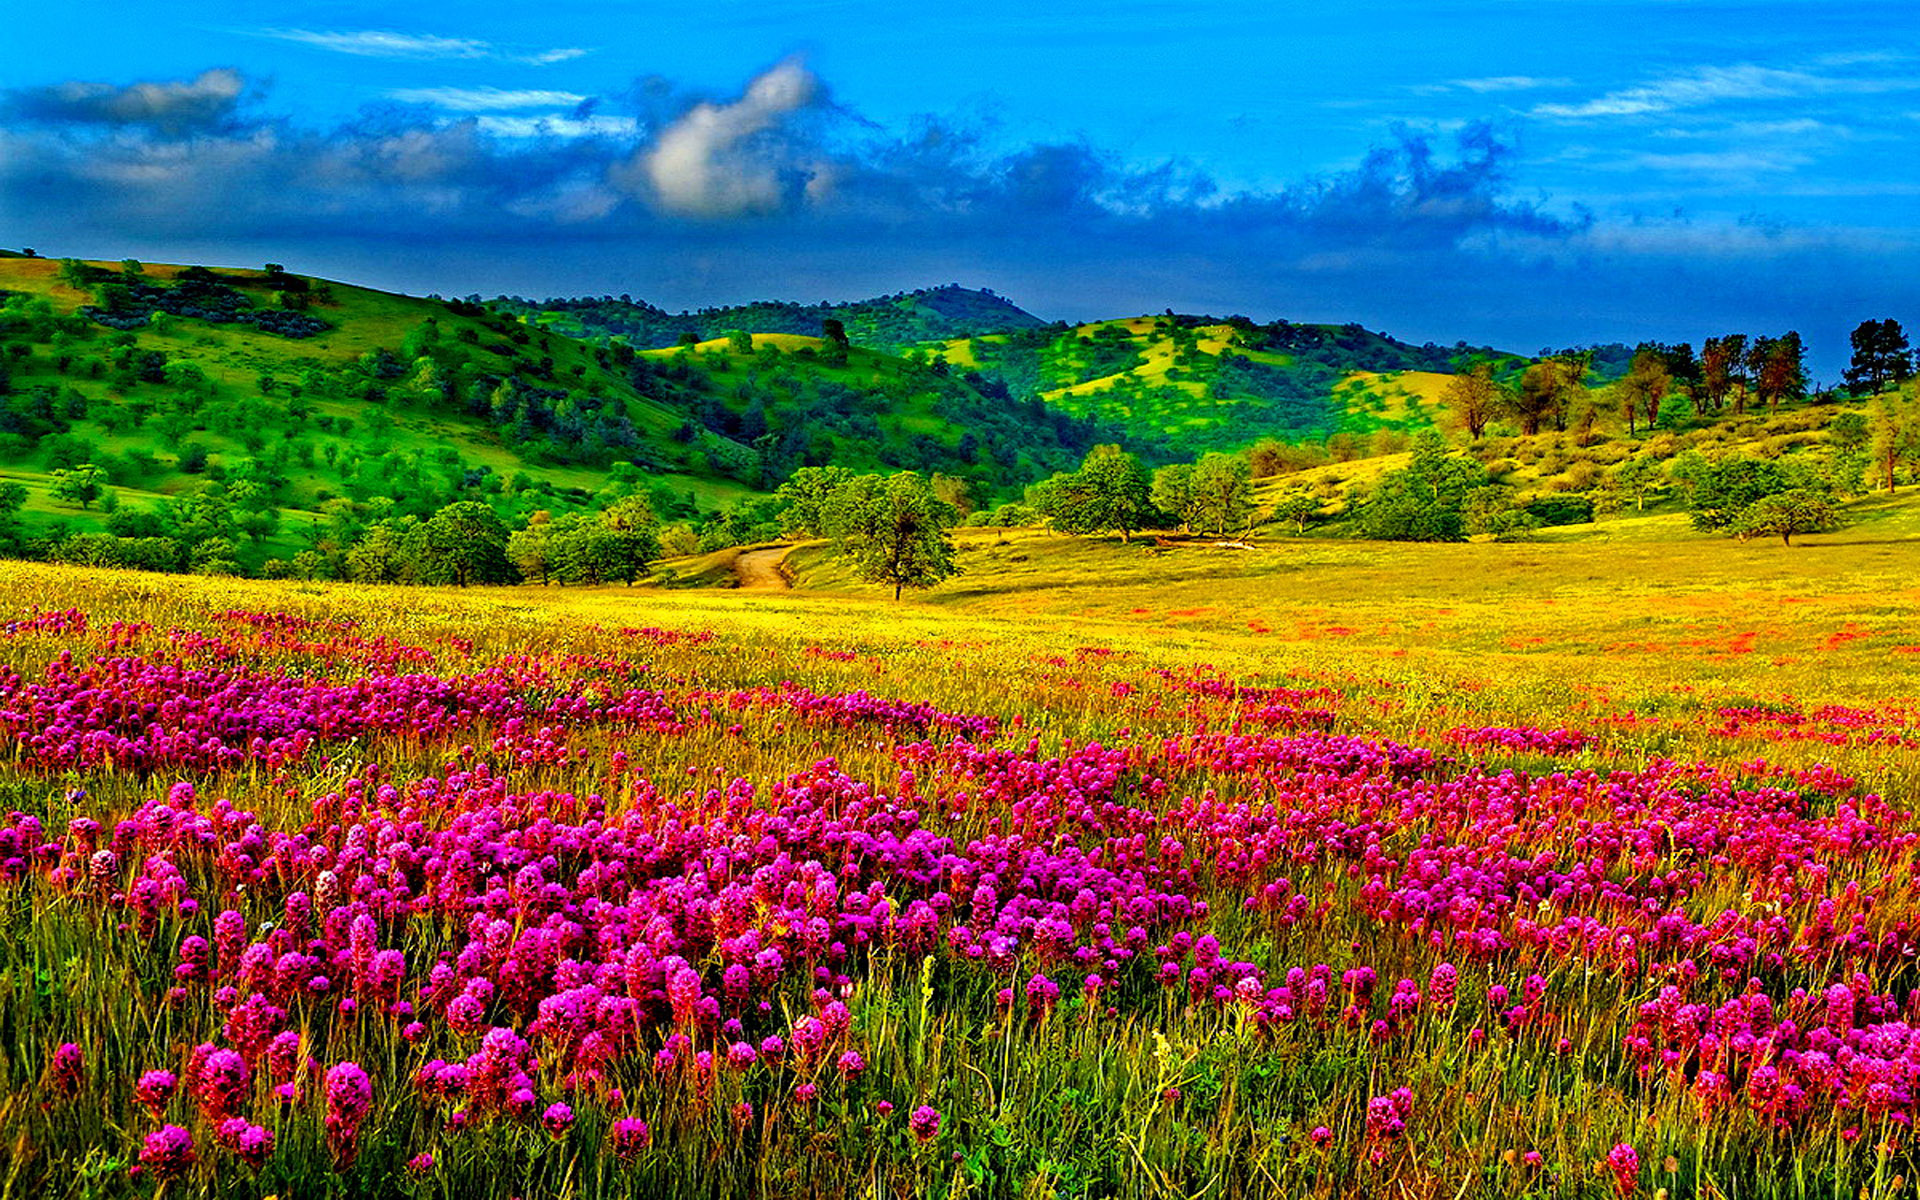 Meadow with purple flowers hills with trees and green grass sky clouds Desktop Wallpaper HD resolution 1920x1200